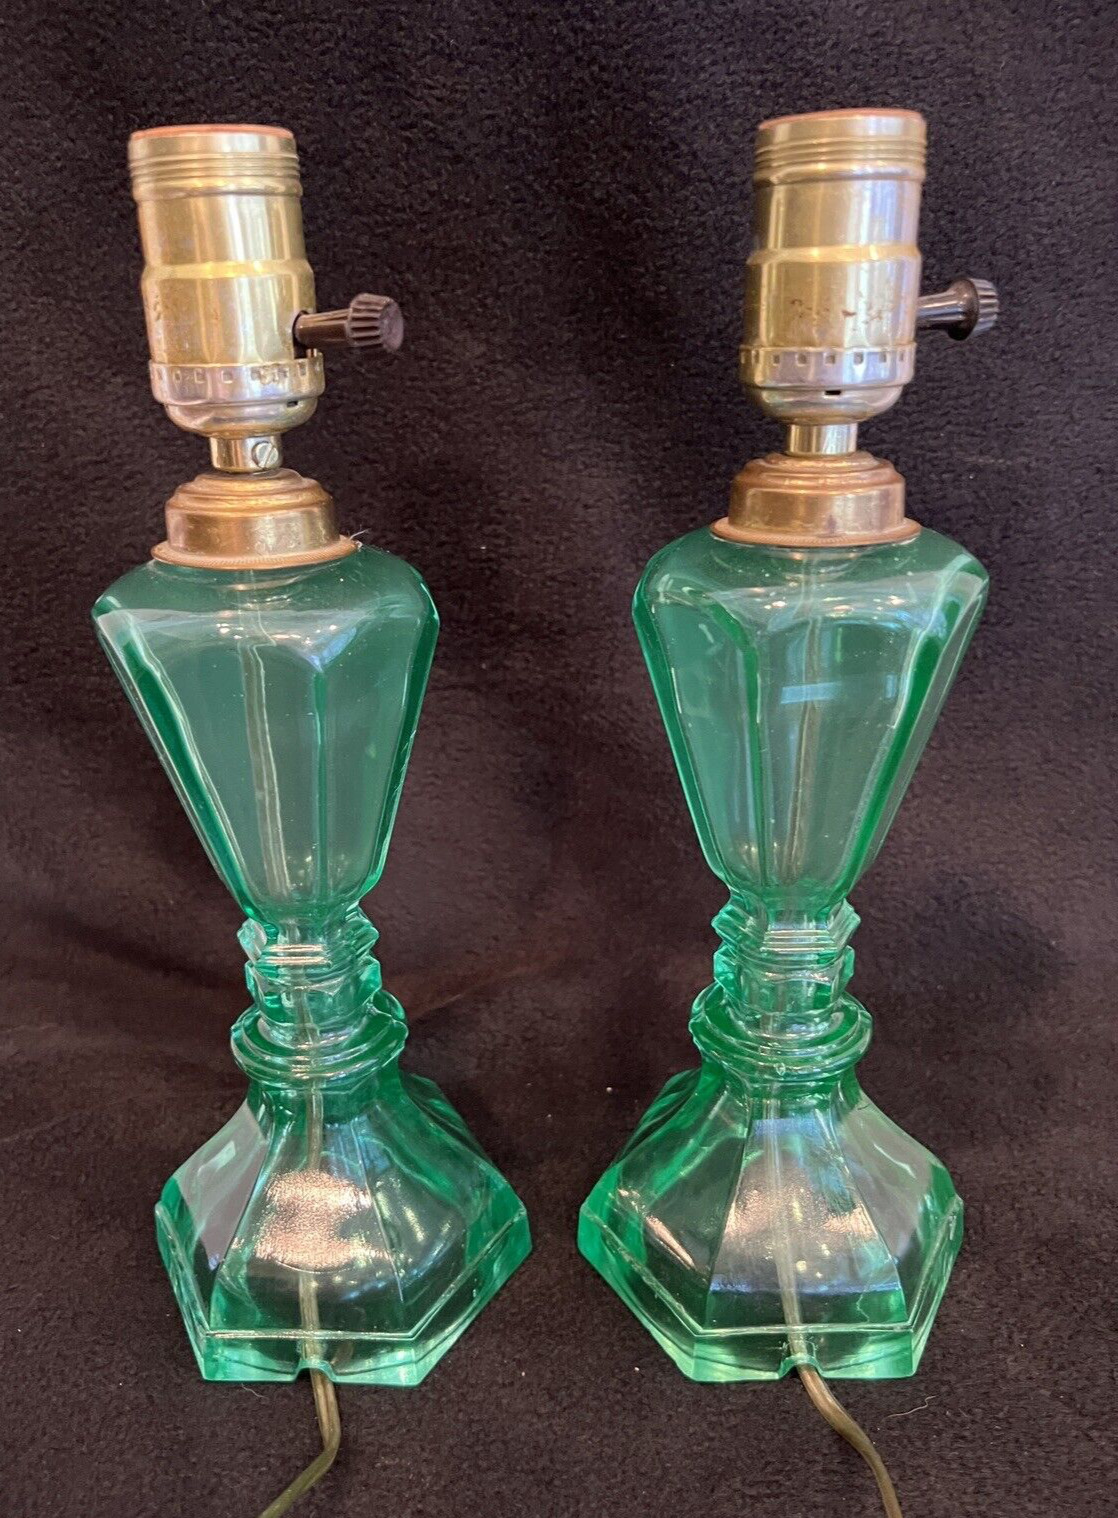 RARE Matching Pair of Vintage Green Uranium Vaseline Electric Table Lamps GLOW